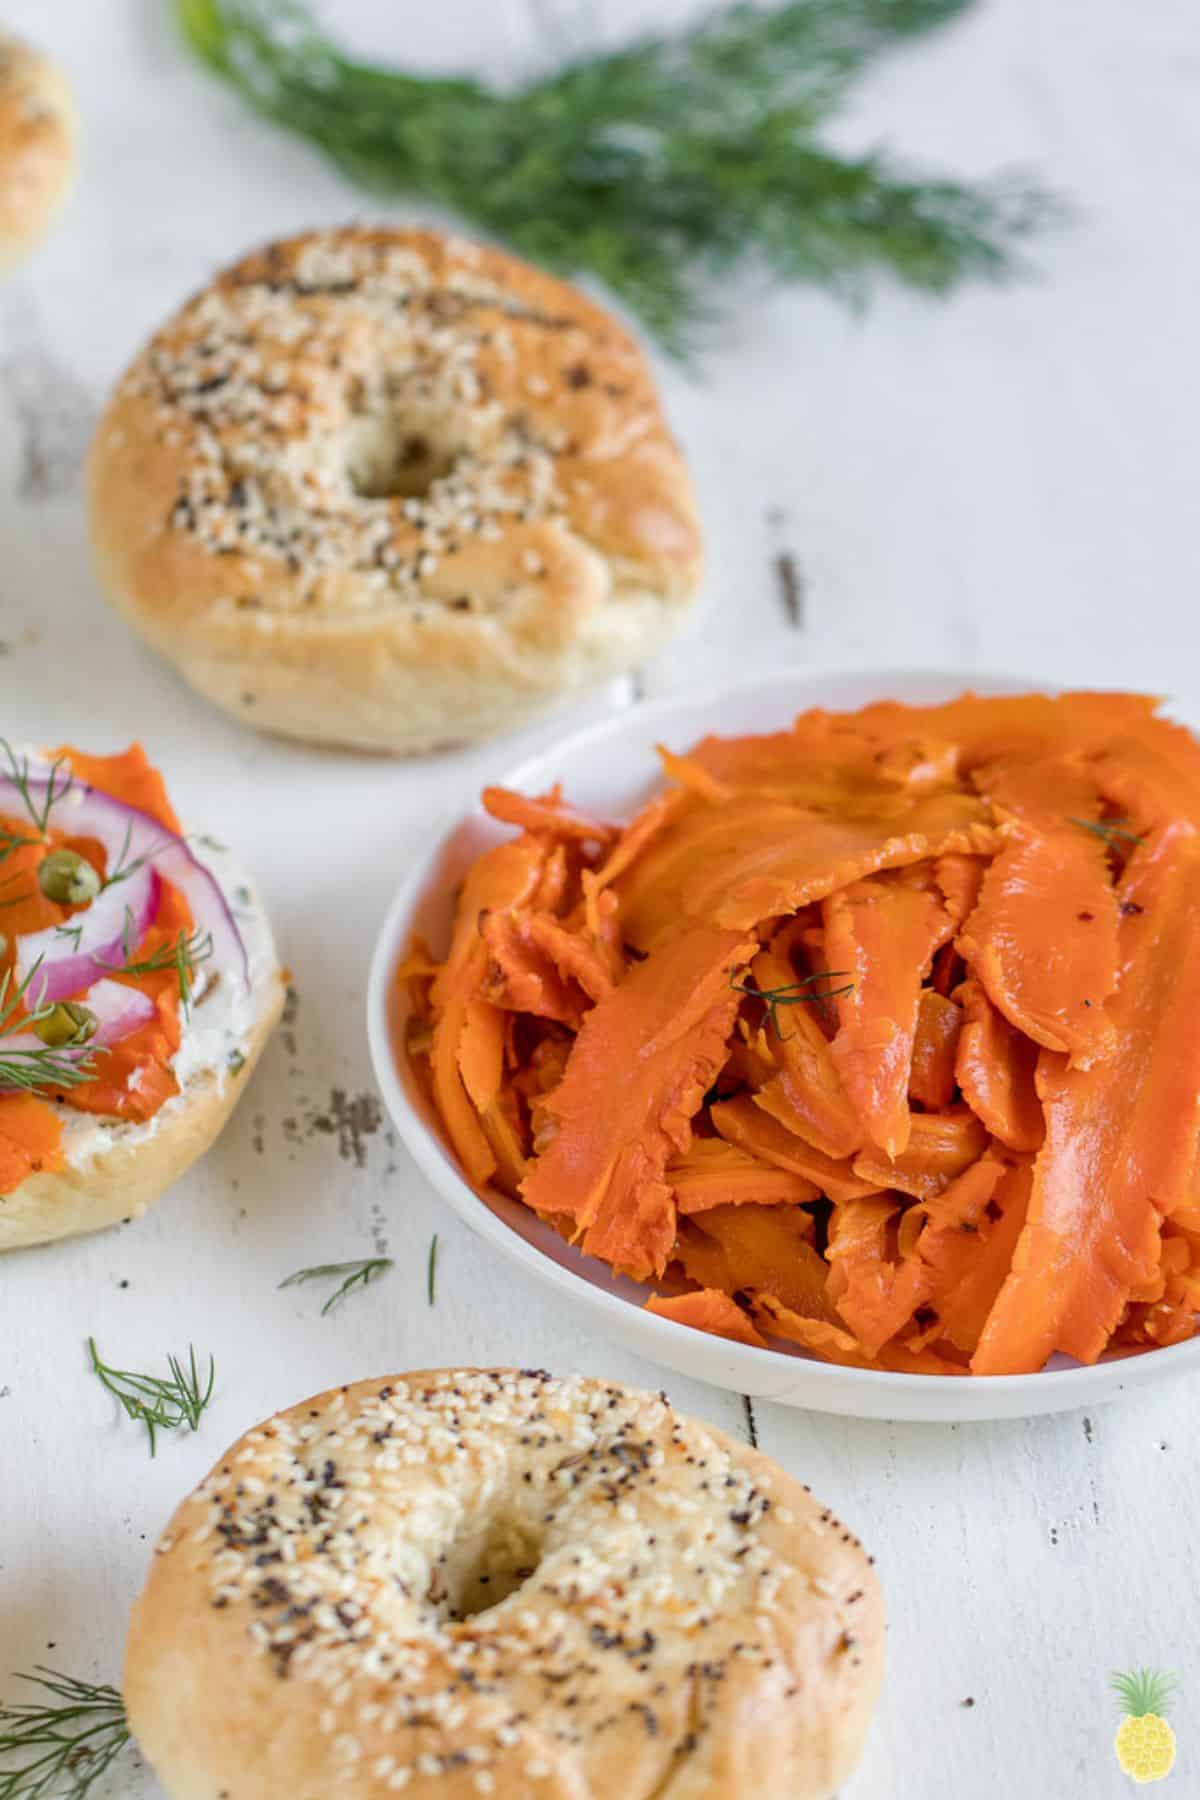 Bowl of carrot lox with bagels.